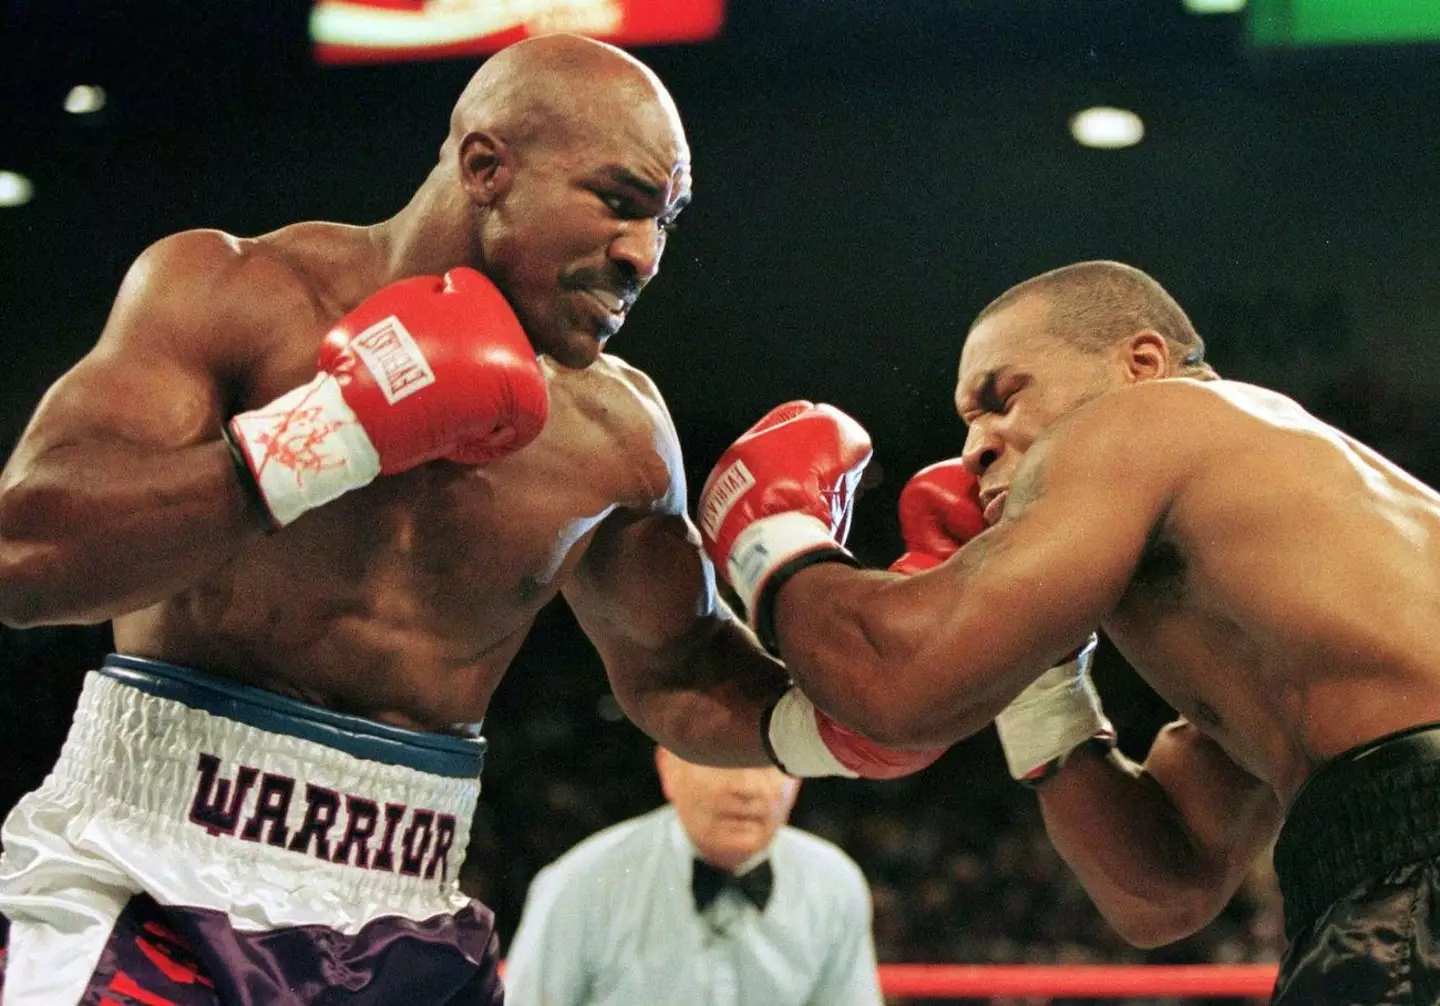 Mike Tyson says that biting off a portion of Evander Holyfield's ear back in 1997 has earned him so much money.